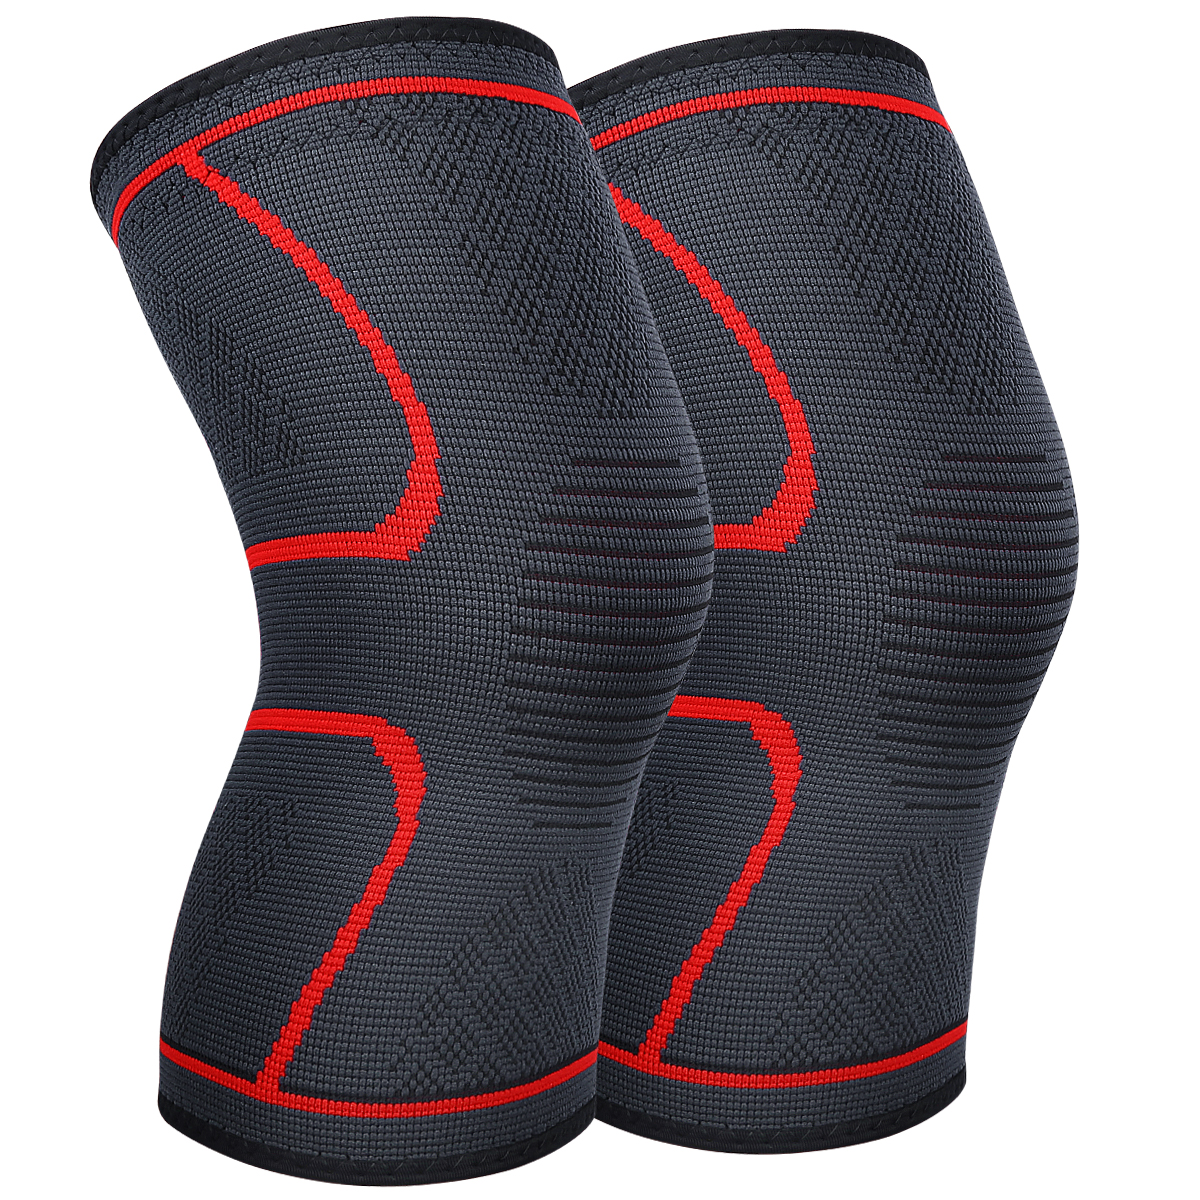 Knee Brace Support Pair for Men Women, AVIDDA Compression Knee Sleeve for Joint Pain Relief, Arthritis, Meniscus Tear, Injury Recovery, Running, Squats, Weight Lifting, Football Red M